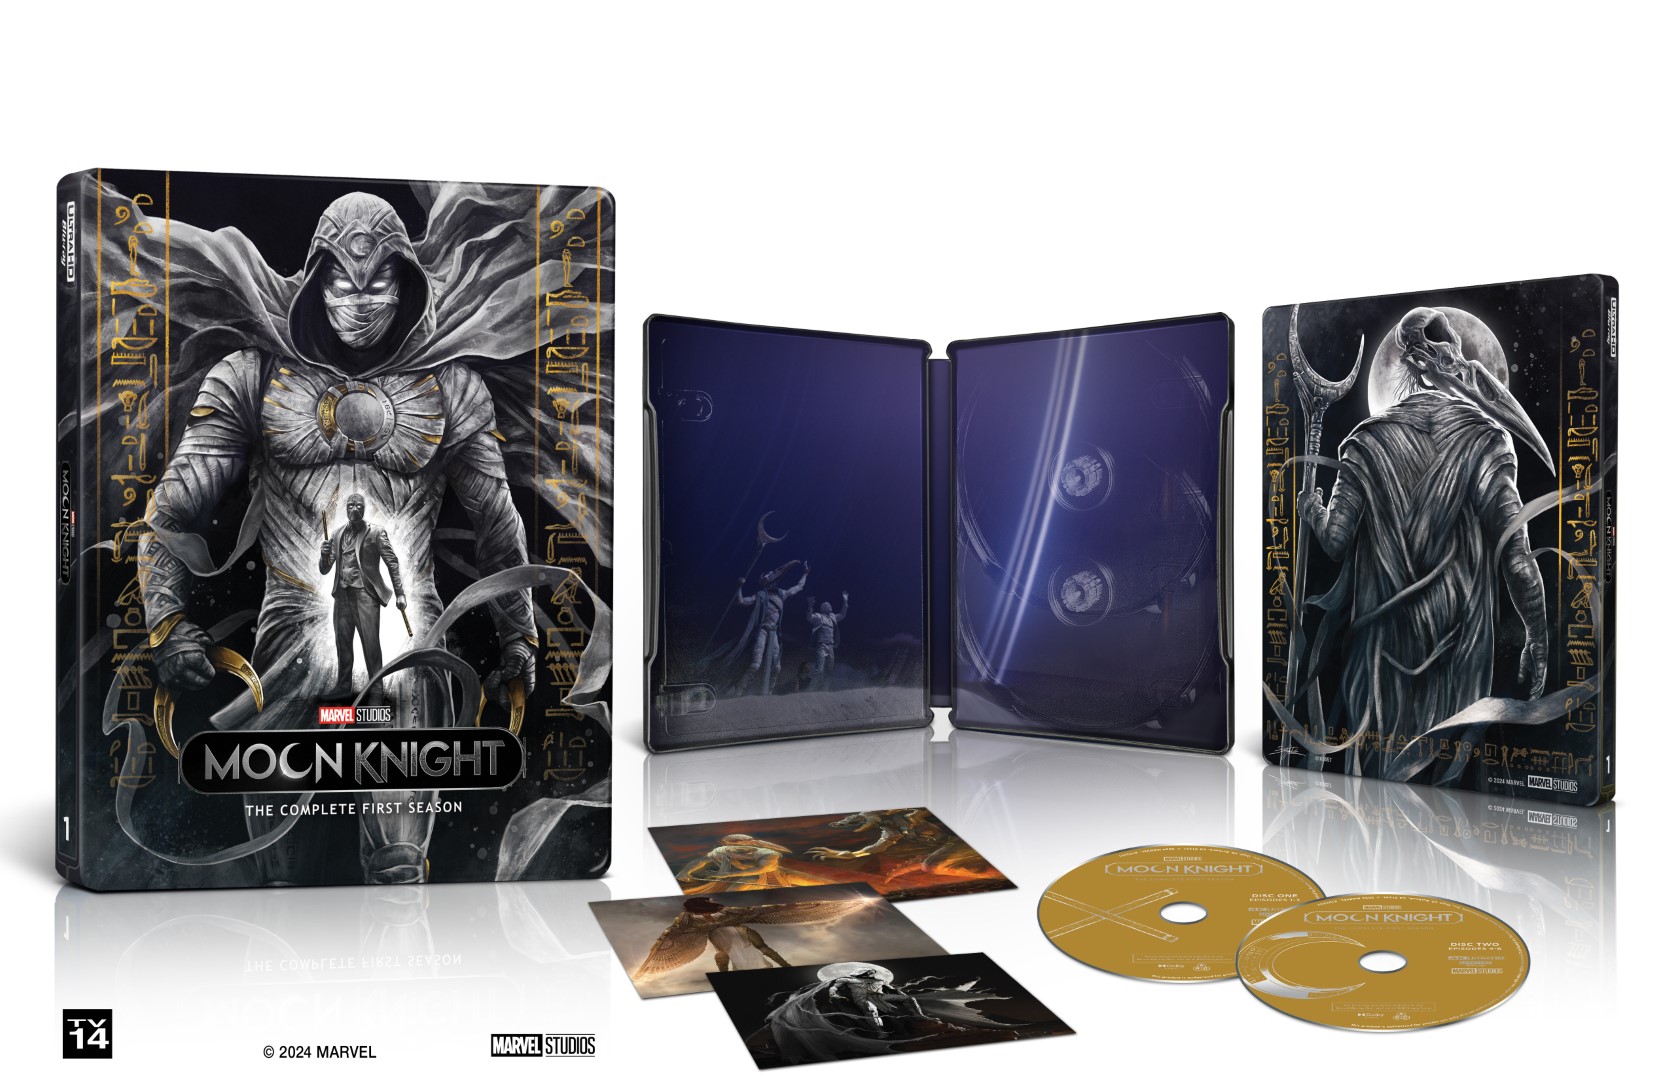 Falcon and the Winter Soldier, Moon Knight, Andor and Obi-Wan Kenobi Collector’s Edition 4K Ultra HD Steelbook